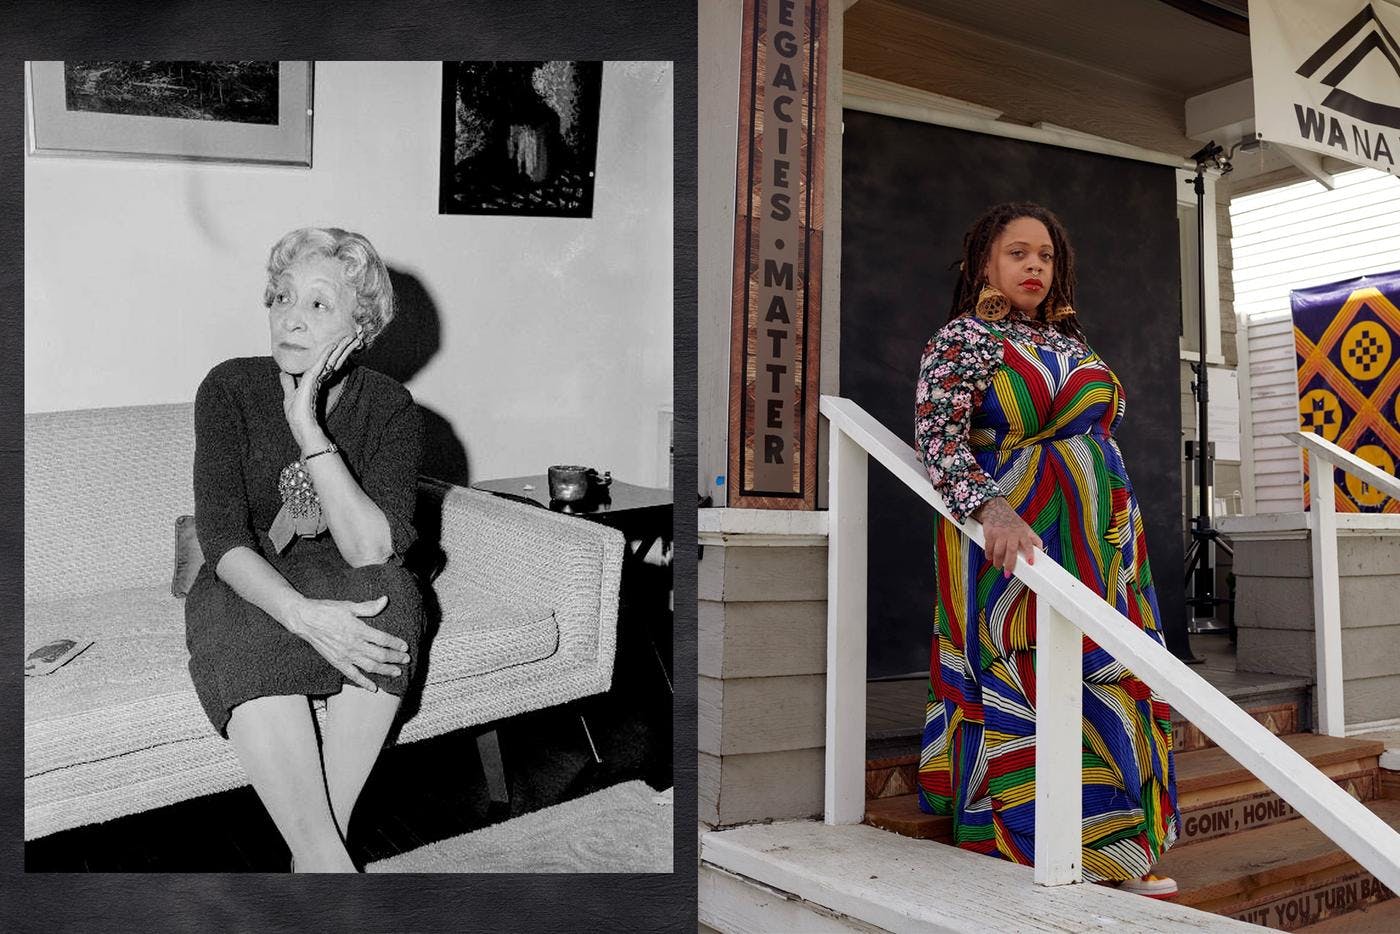 left: a black and white photo of a woman sitting on a couch, right: a woman stands on front porch steps